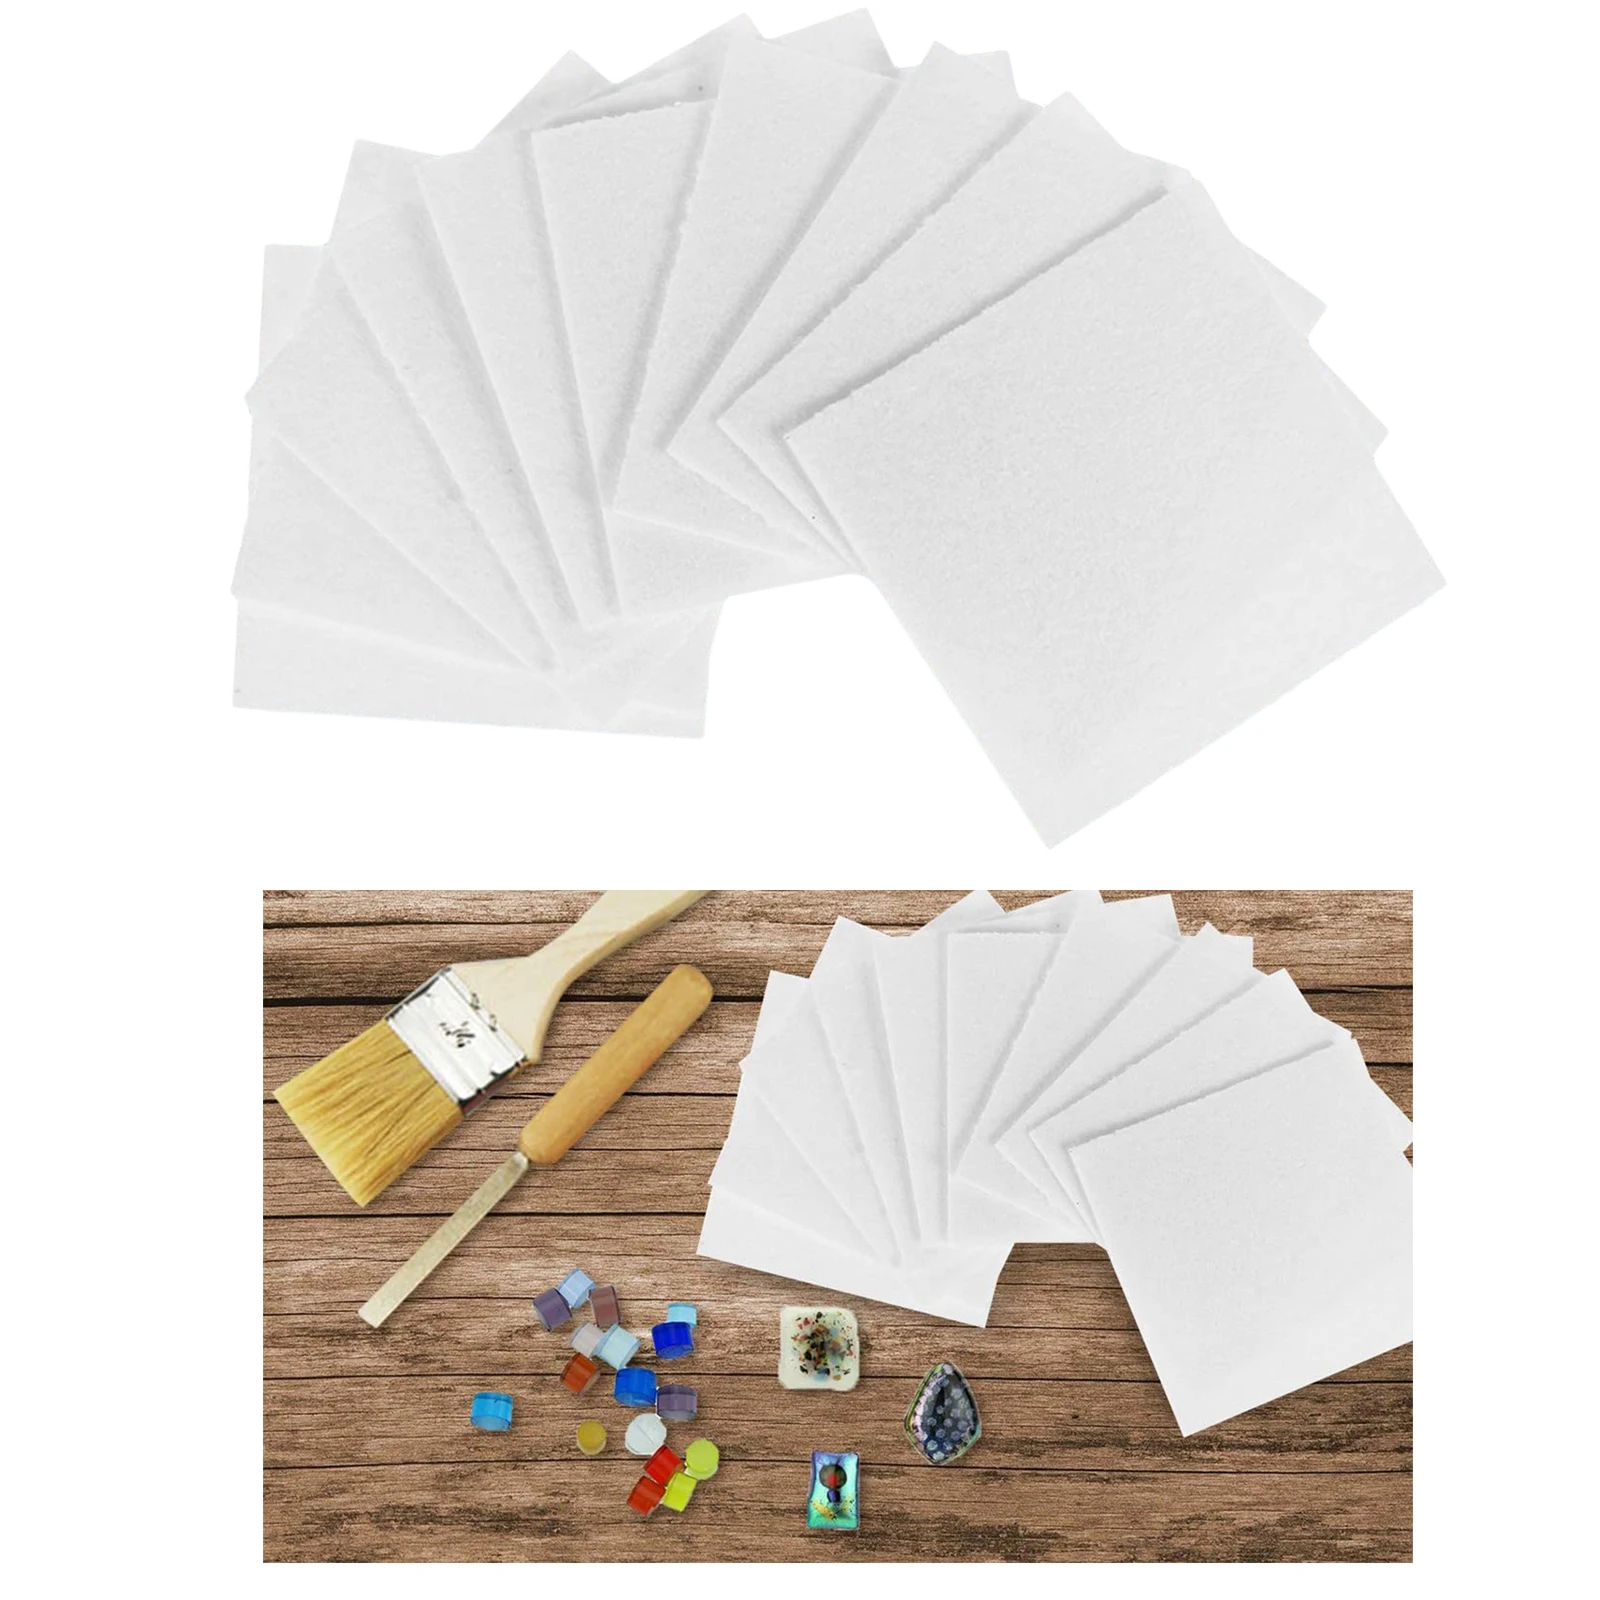 50 Sheets Ceramic Fiber Square Microwave Kiln Glass Fusing Paper 80x80mm For Household Tools